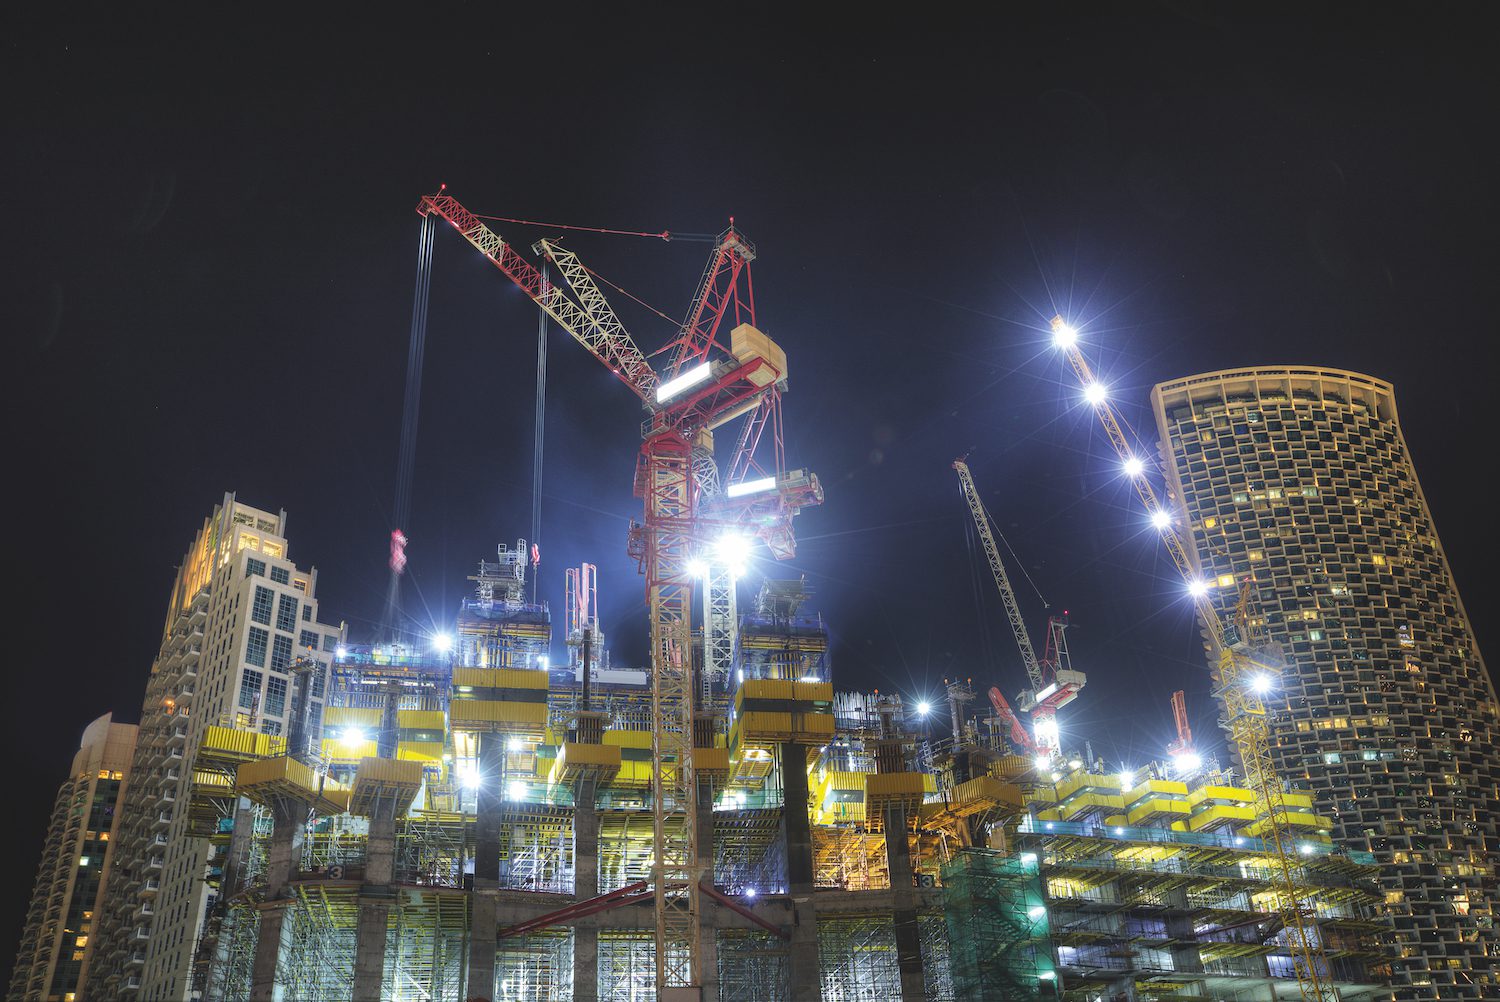 Importance of adequate lighting on construction sites